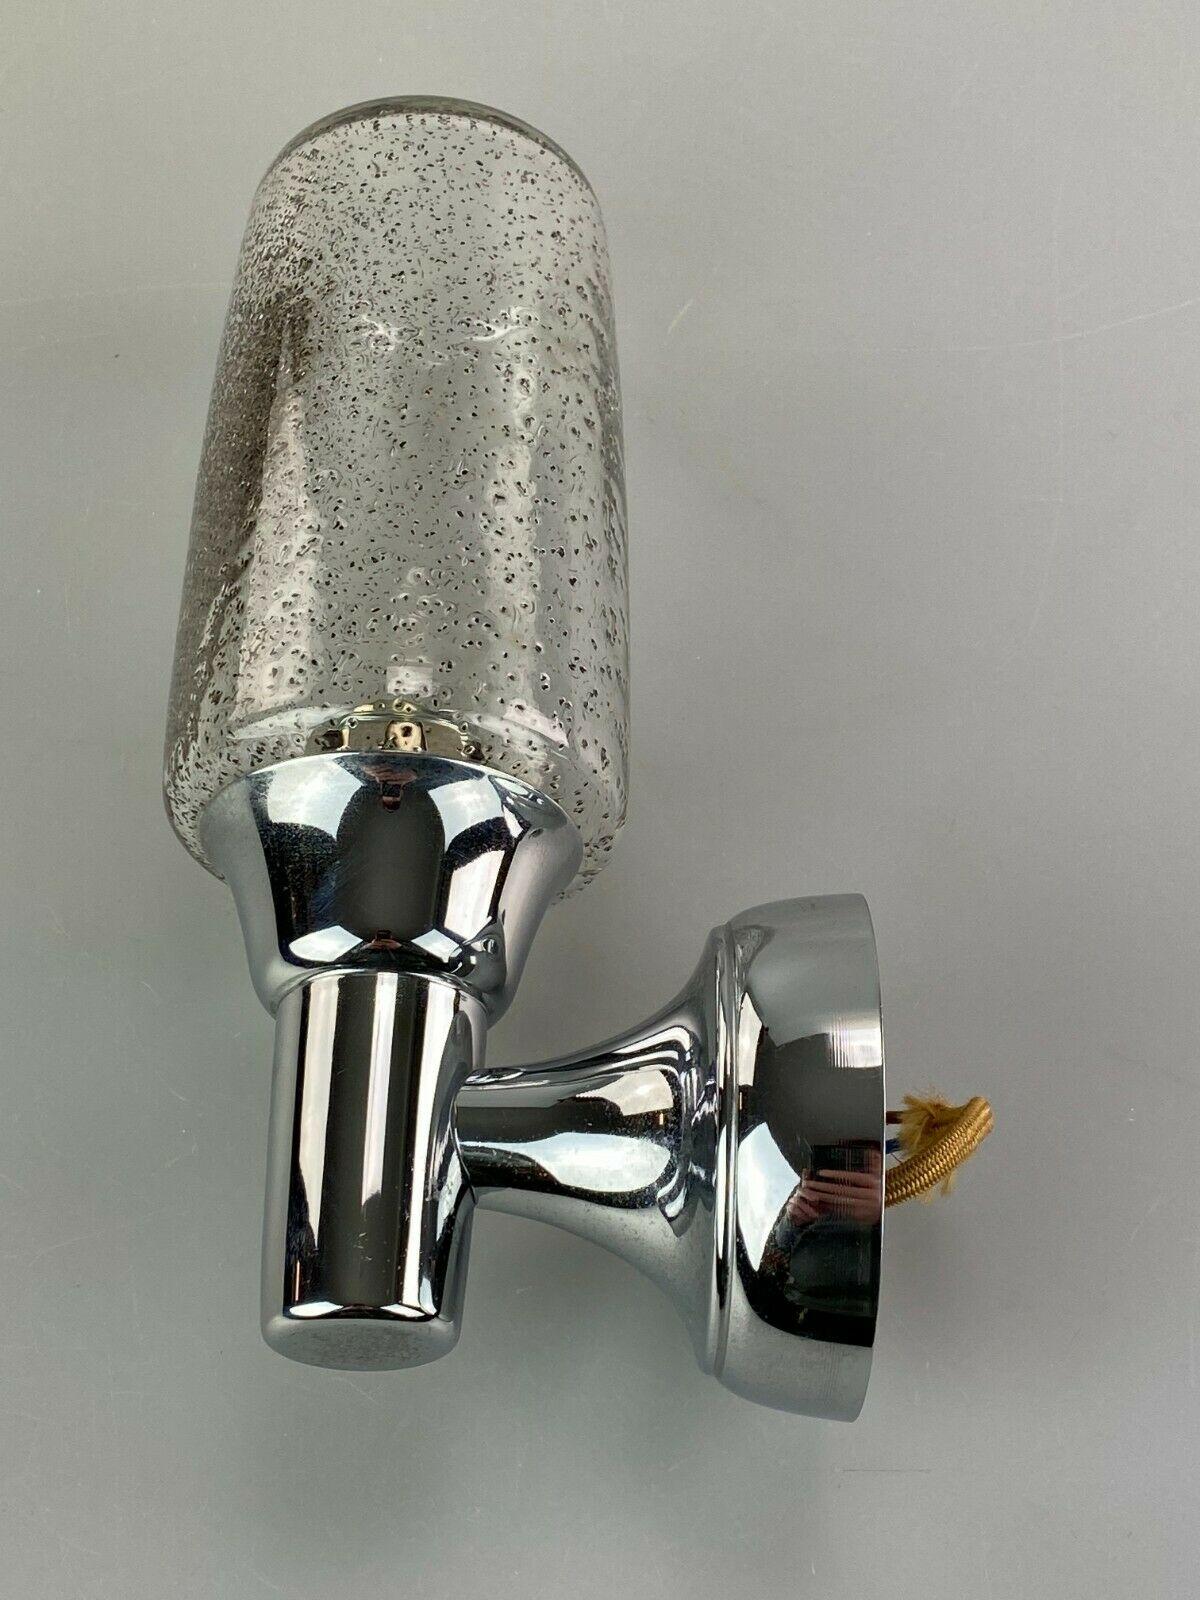 German 60s 70s Lamp Light Wall Lamp Wall Sconce Hillebrand Space Age Design For Sale